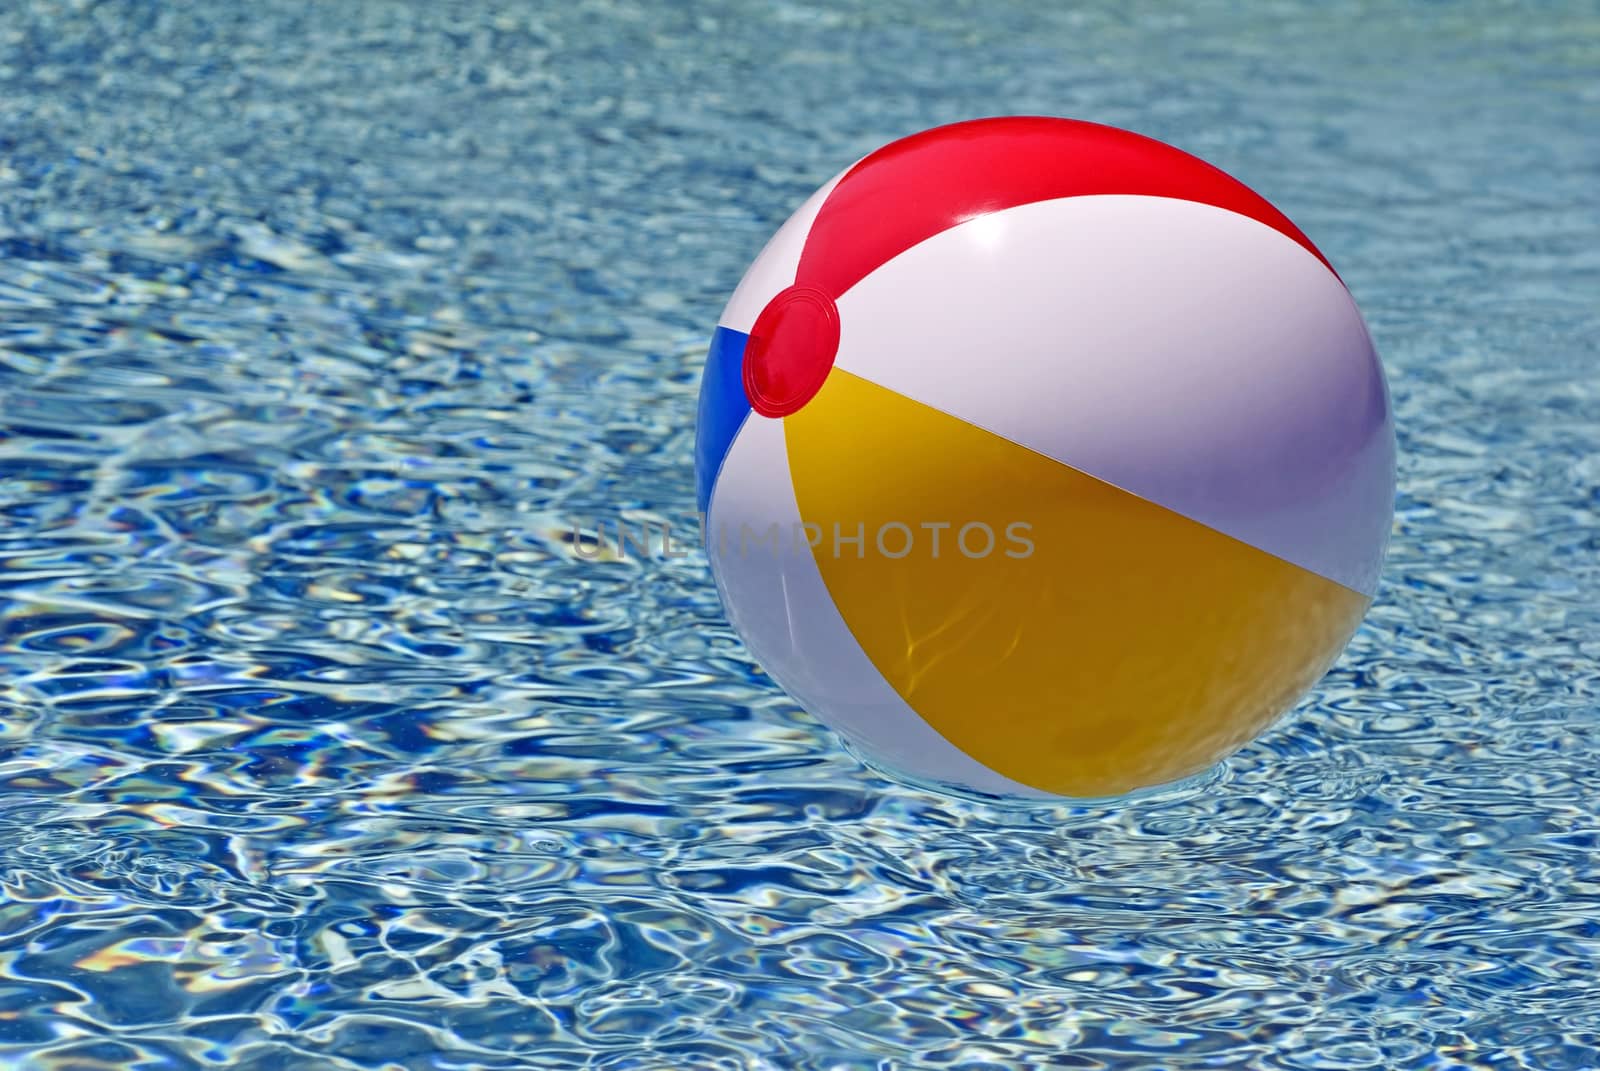 Bright Colorful Beach Ball Floating In Swimming Pool by stockbuster1